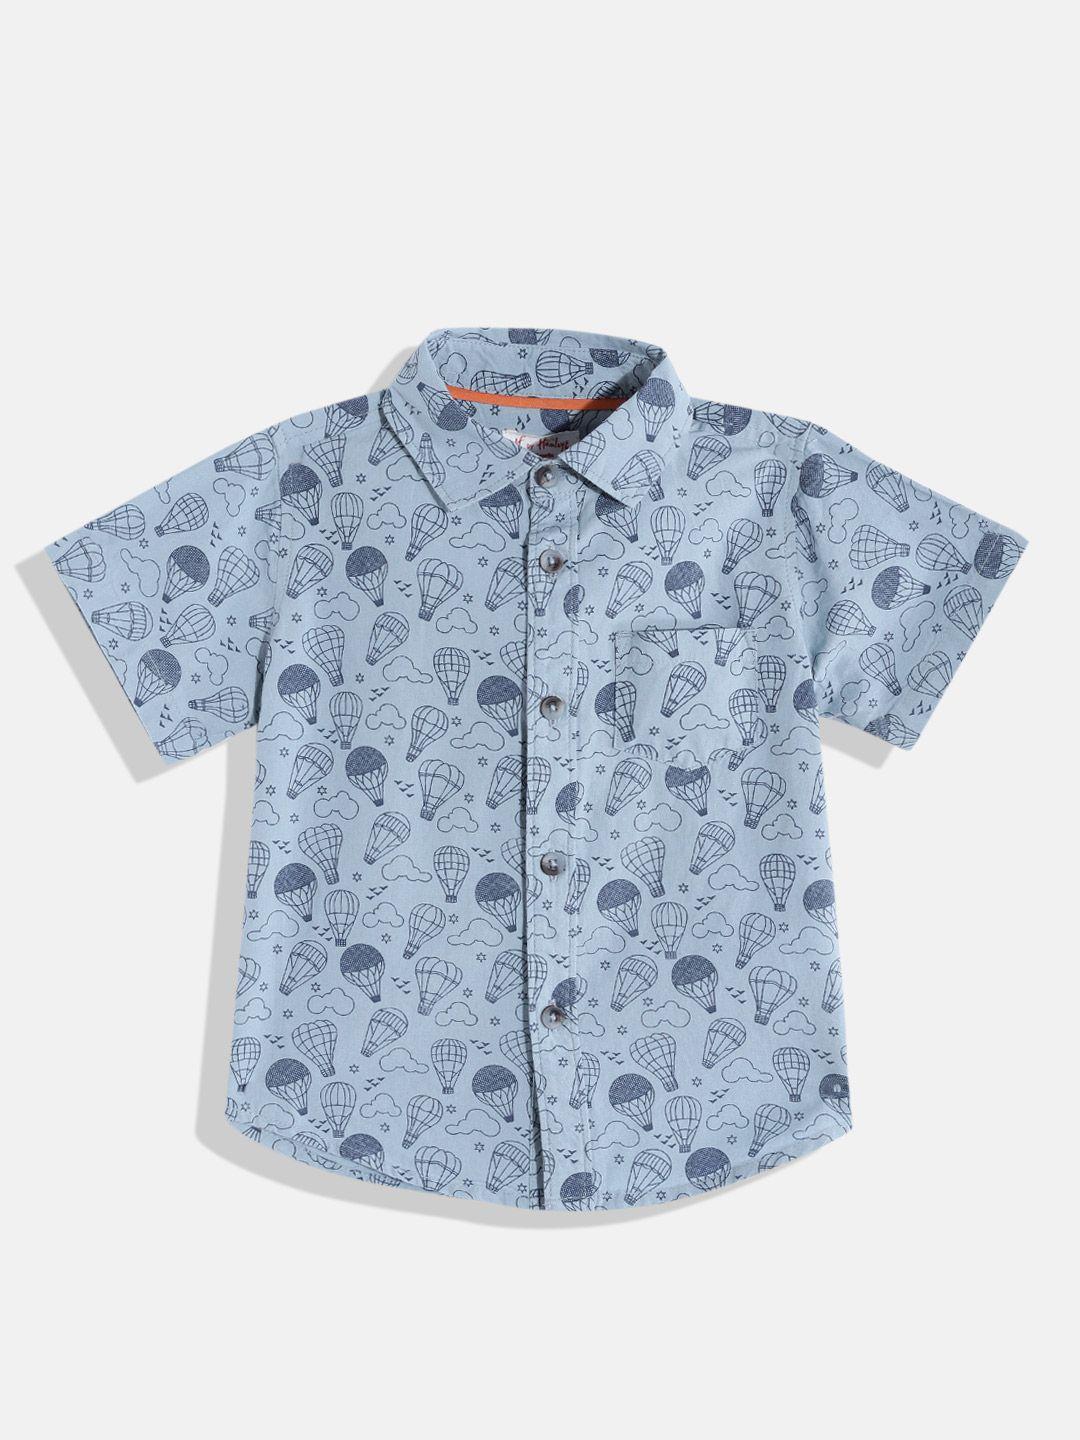 h by hamleys infant boys blue printed cotton casual shirt